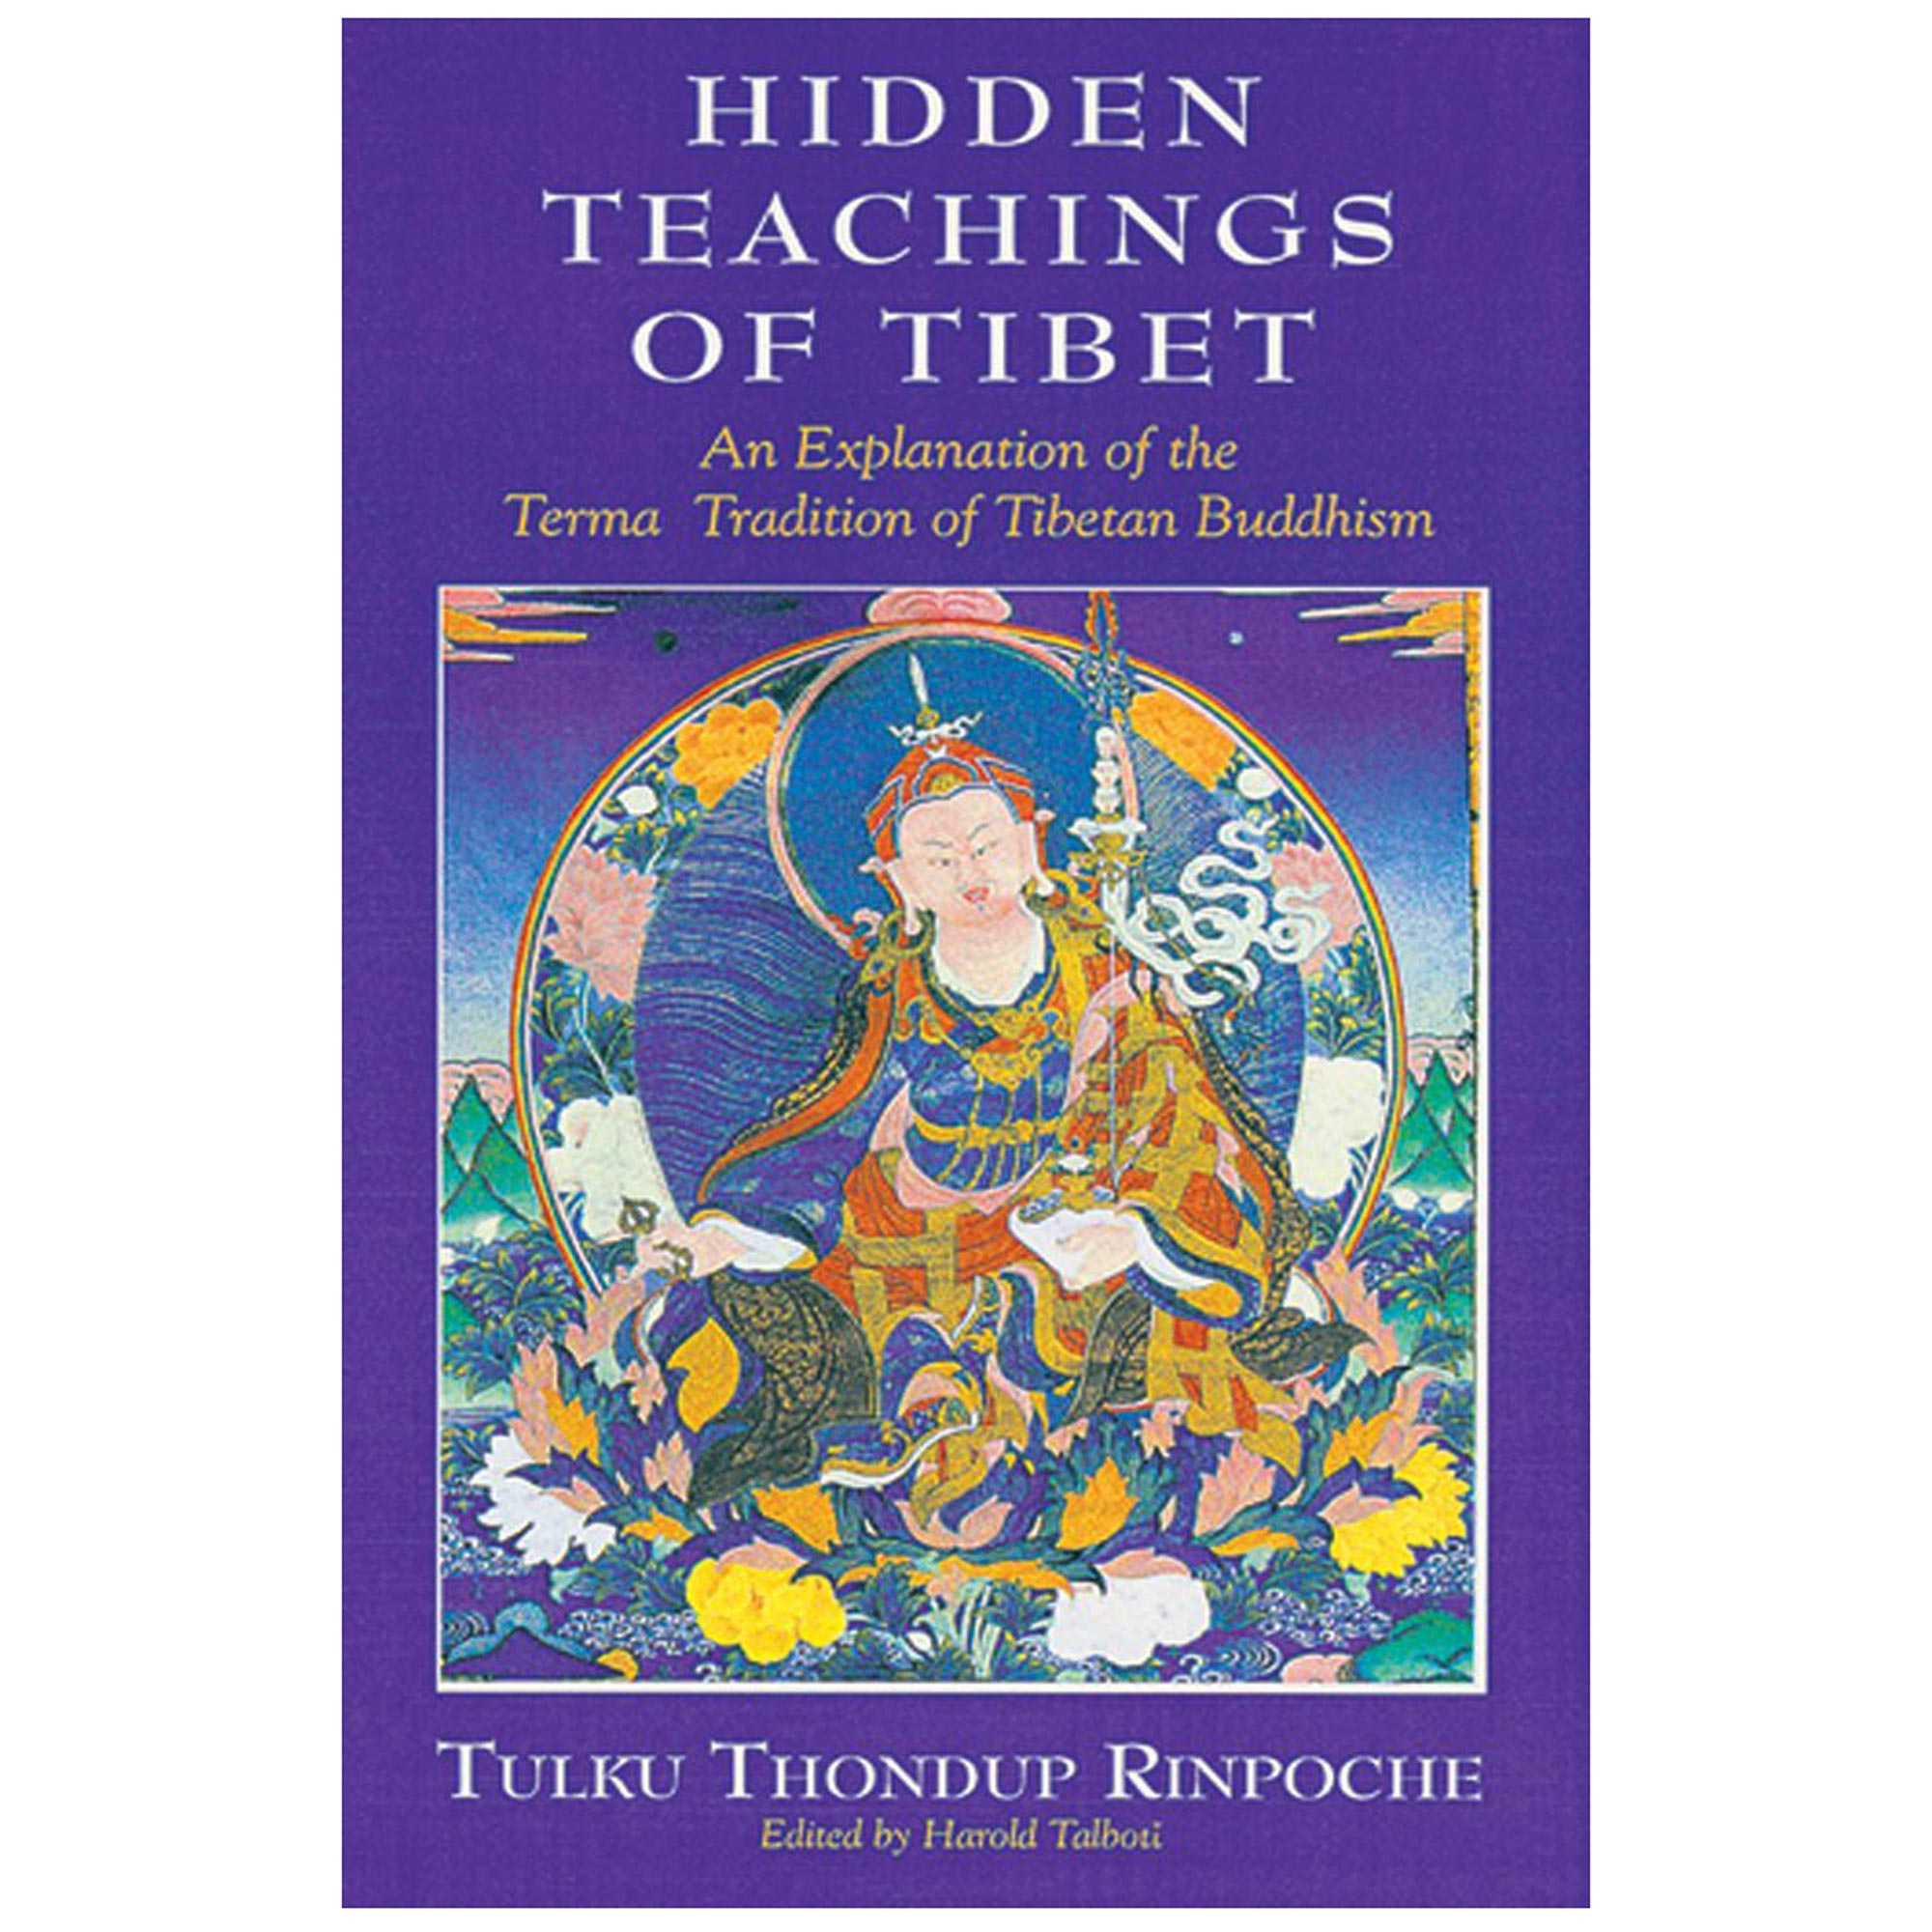 The Hidden Teachings of Tibet: An Explanation of the Terma Tradition of Tibet